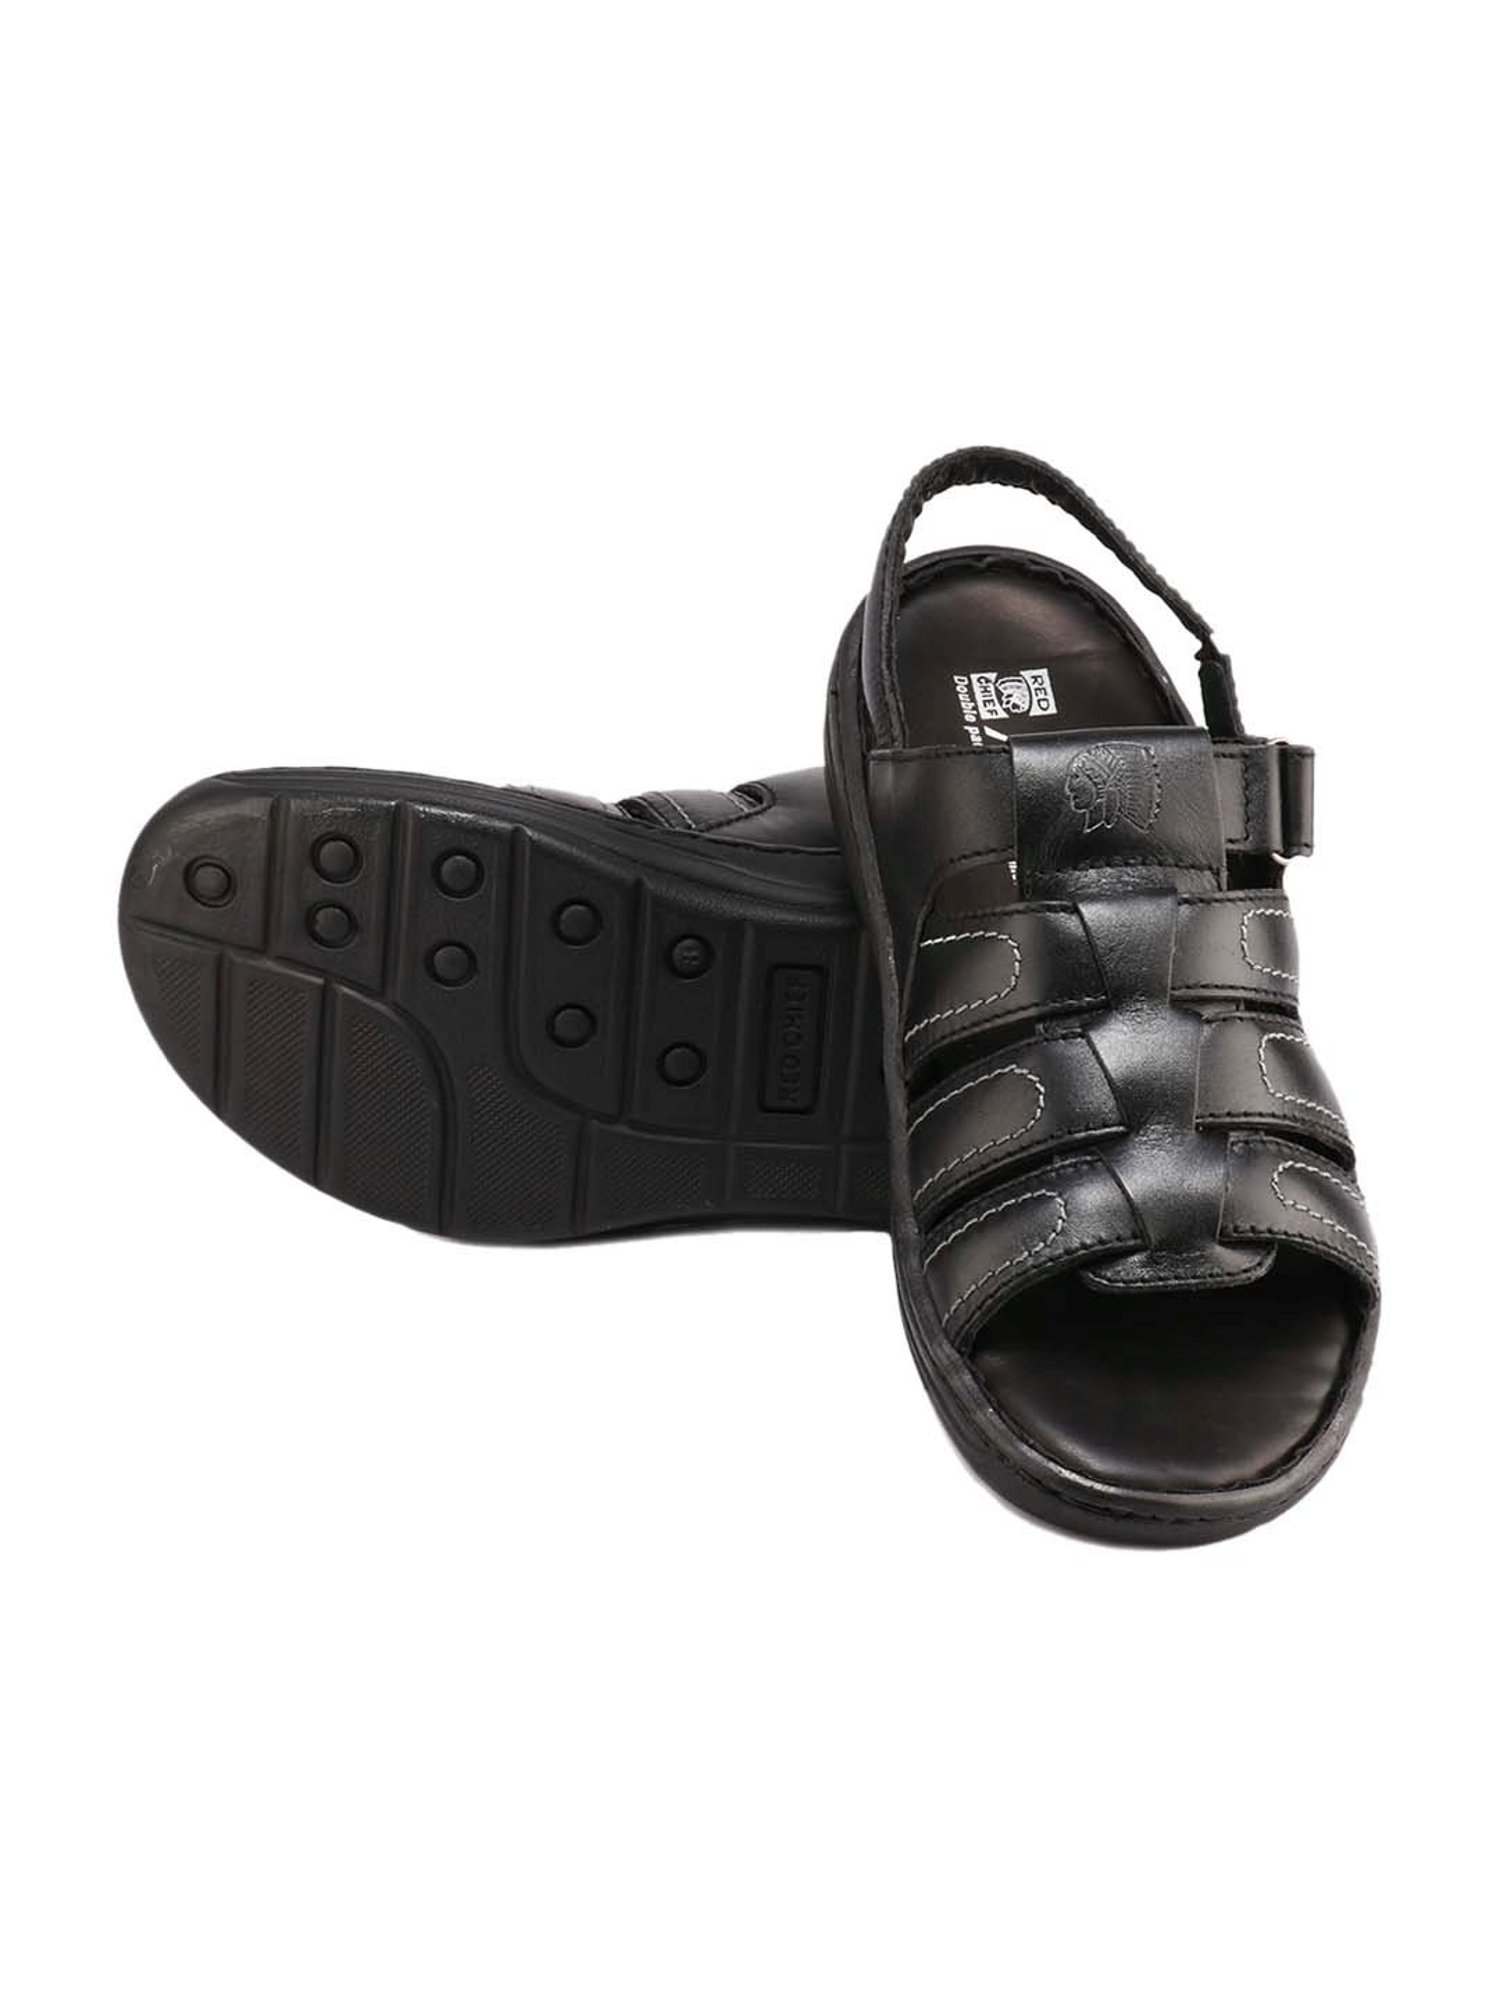 Red Chief Casual Black Sandals For Men RC683, Size: 7-10 at Rs 1865/pair in  Satna